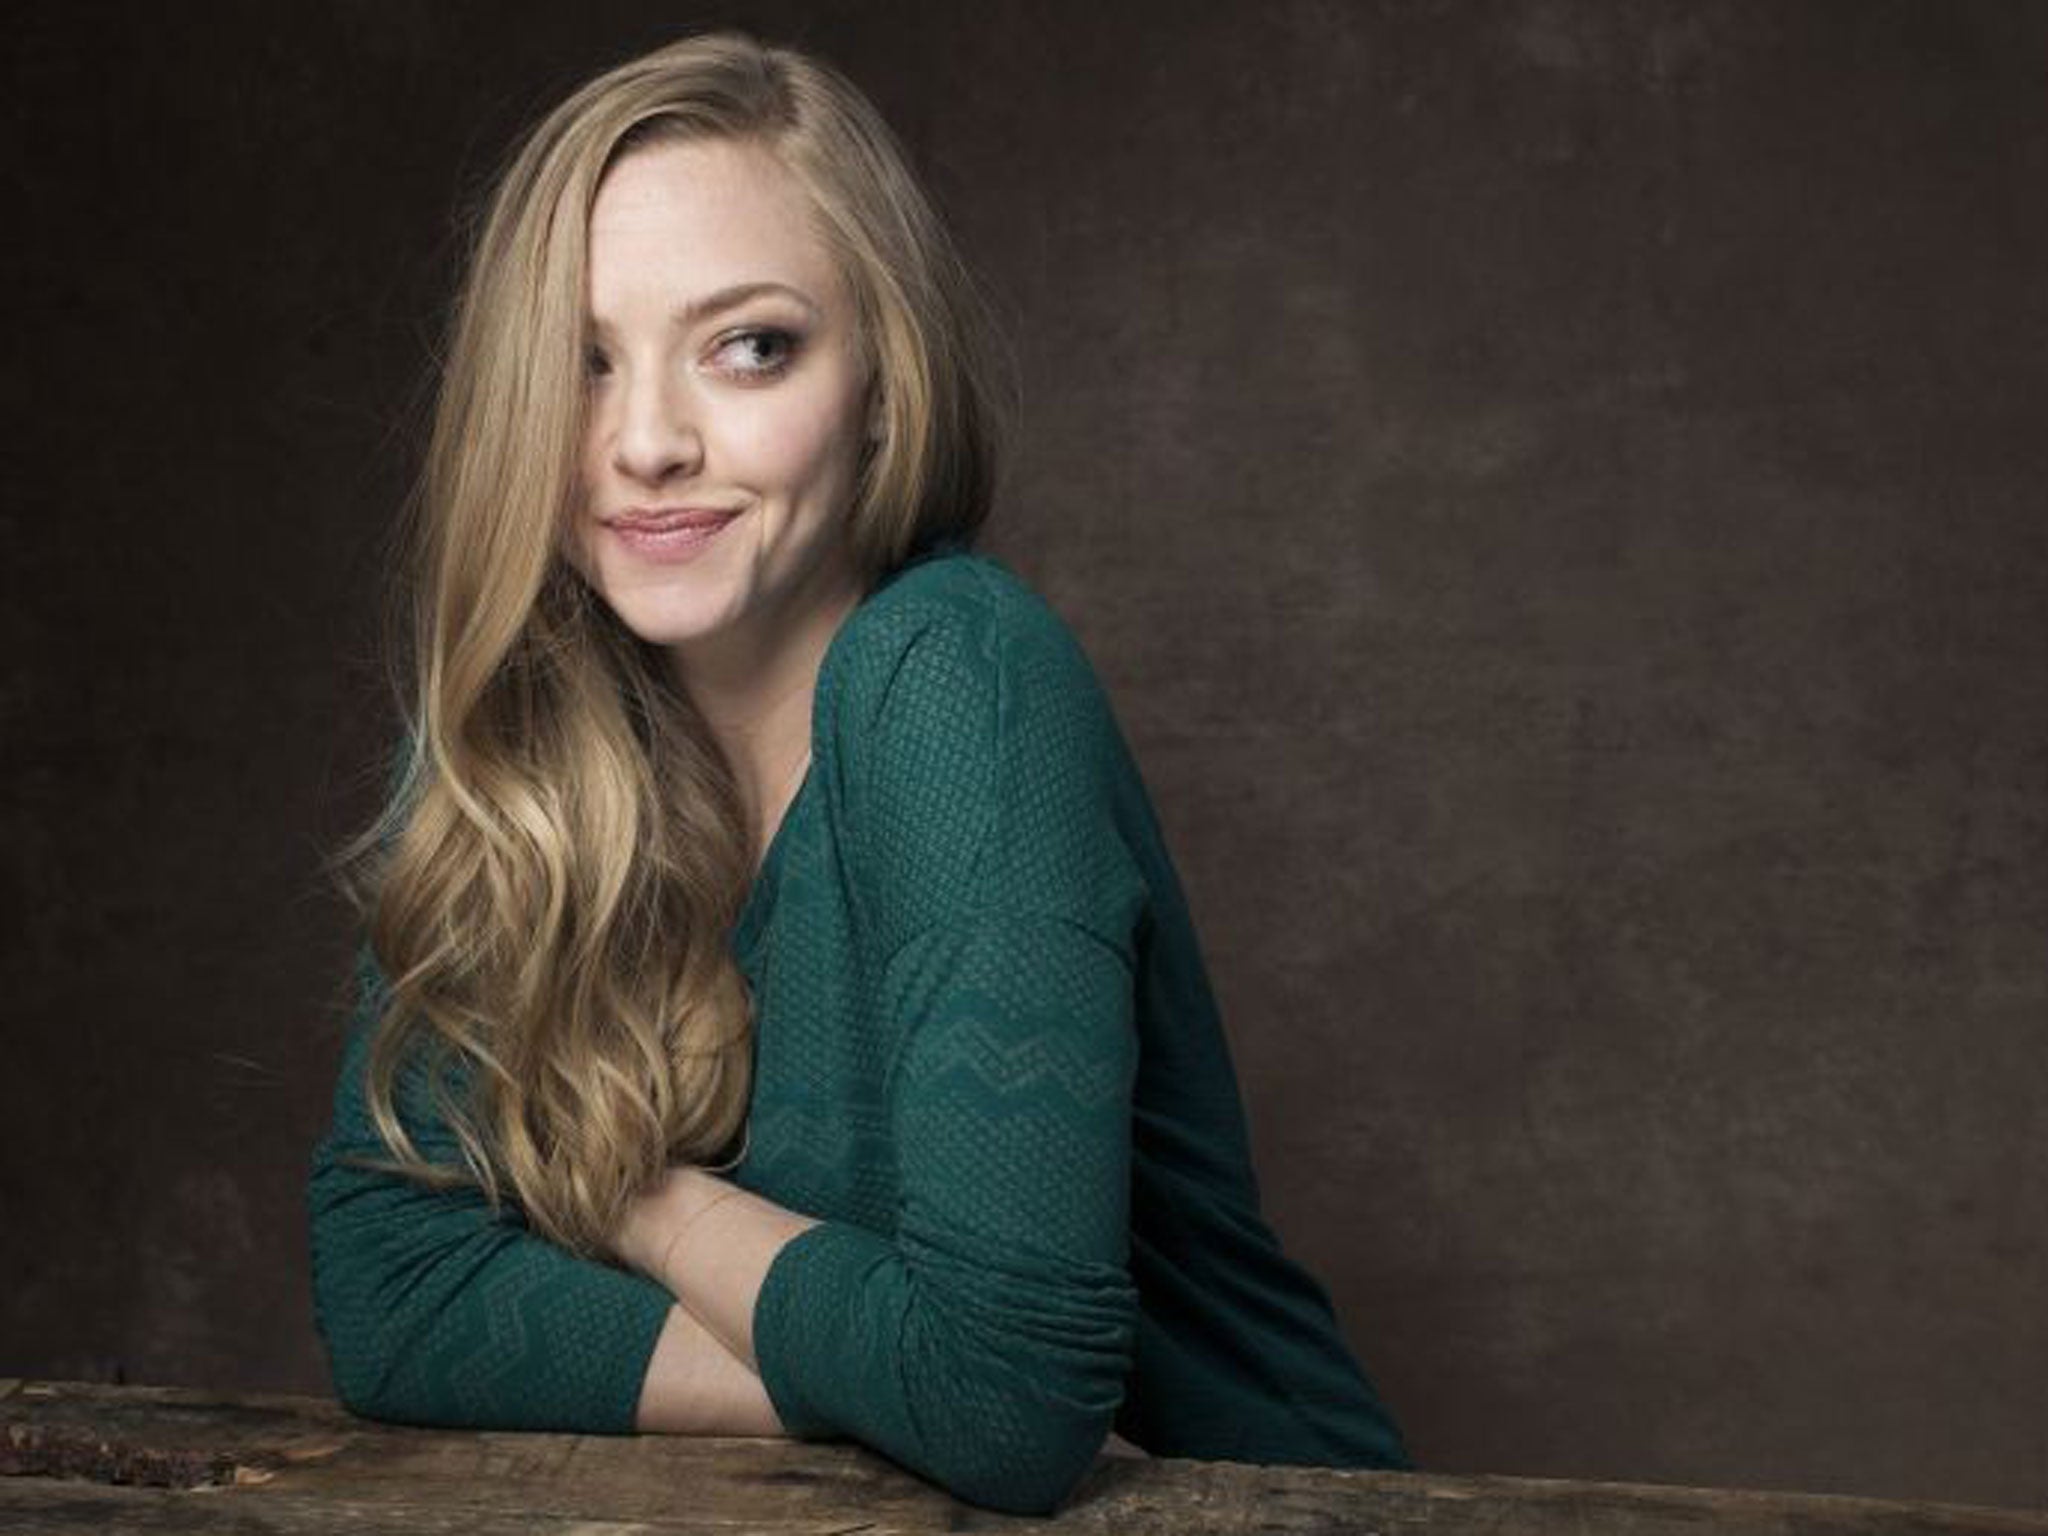 Amanda Love Porn Sex - Amanda Seyfried: The girl next door with a dark side | The Independent |  The Independent